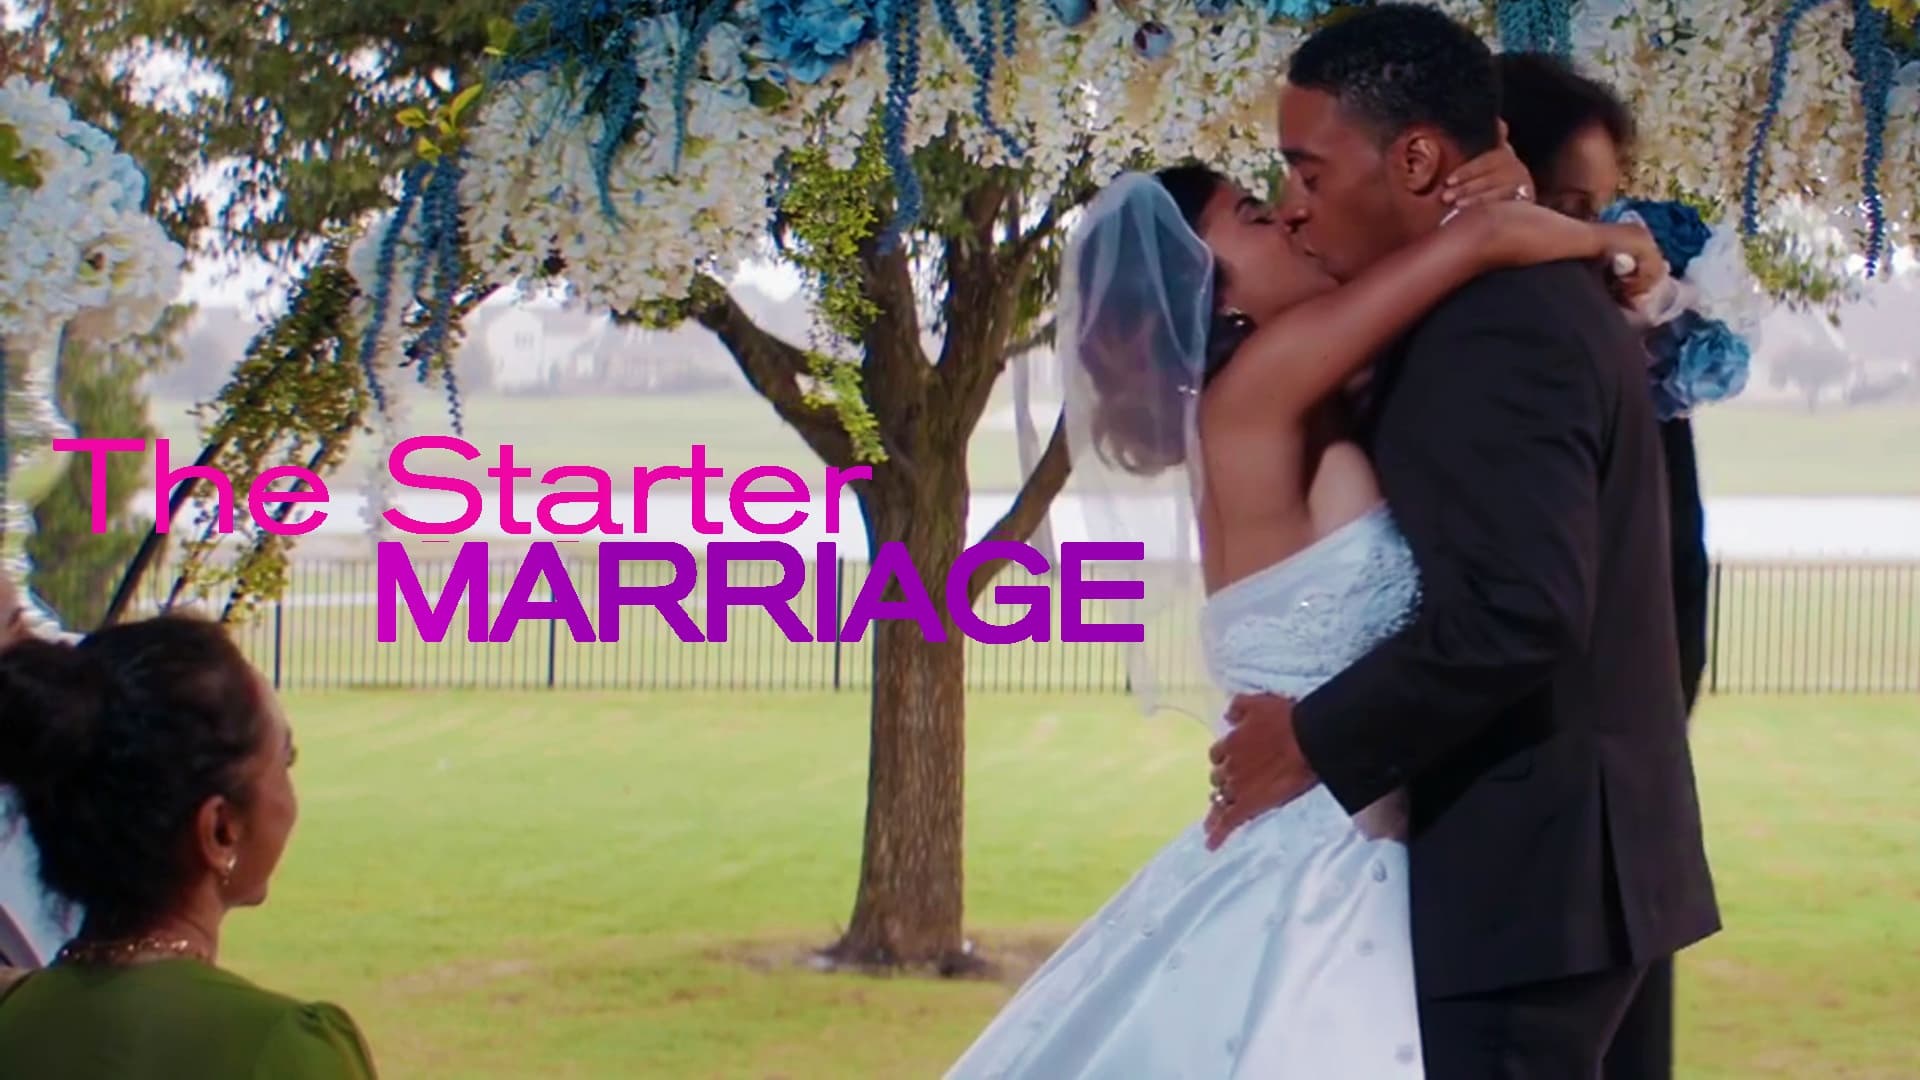 The Starter Marriage - film